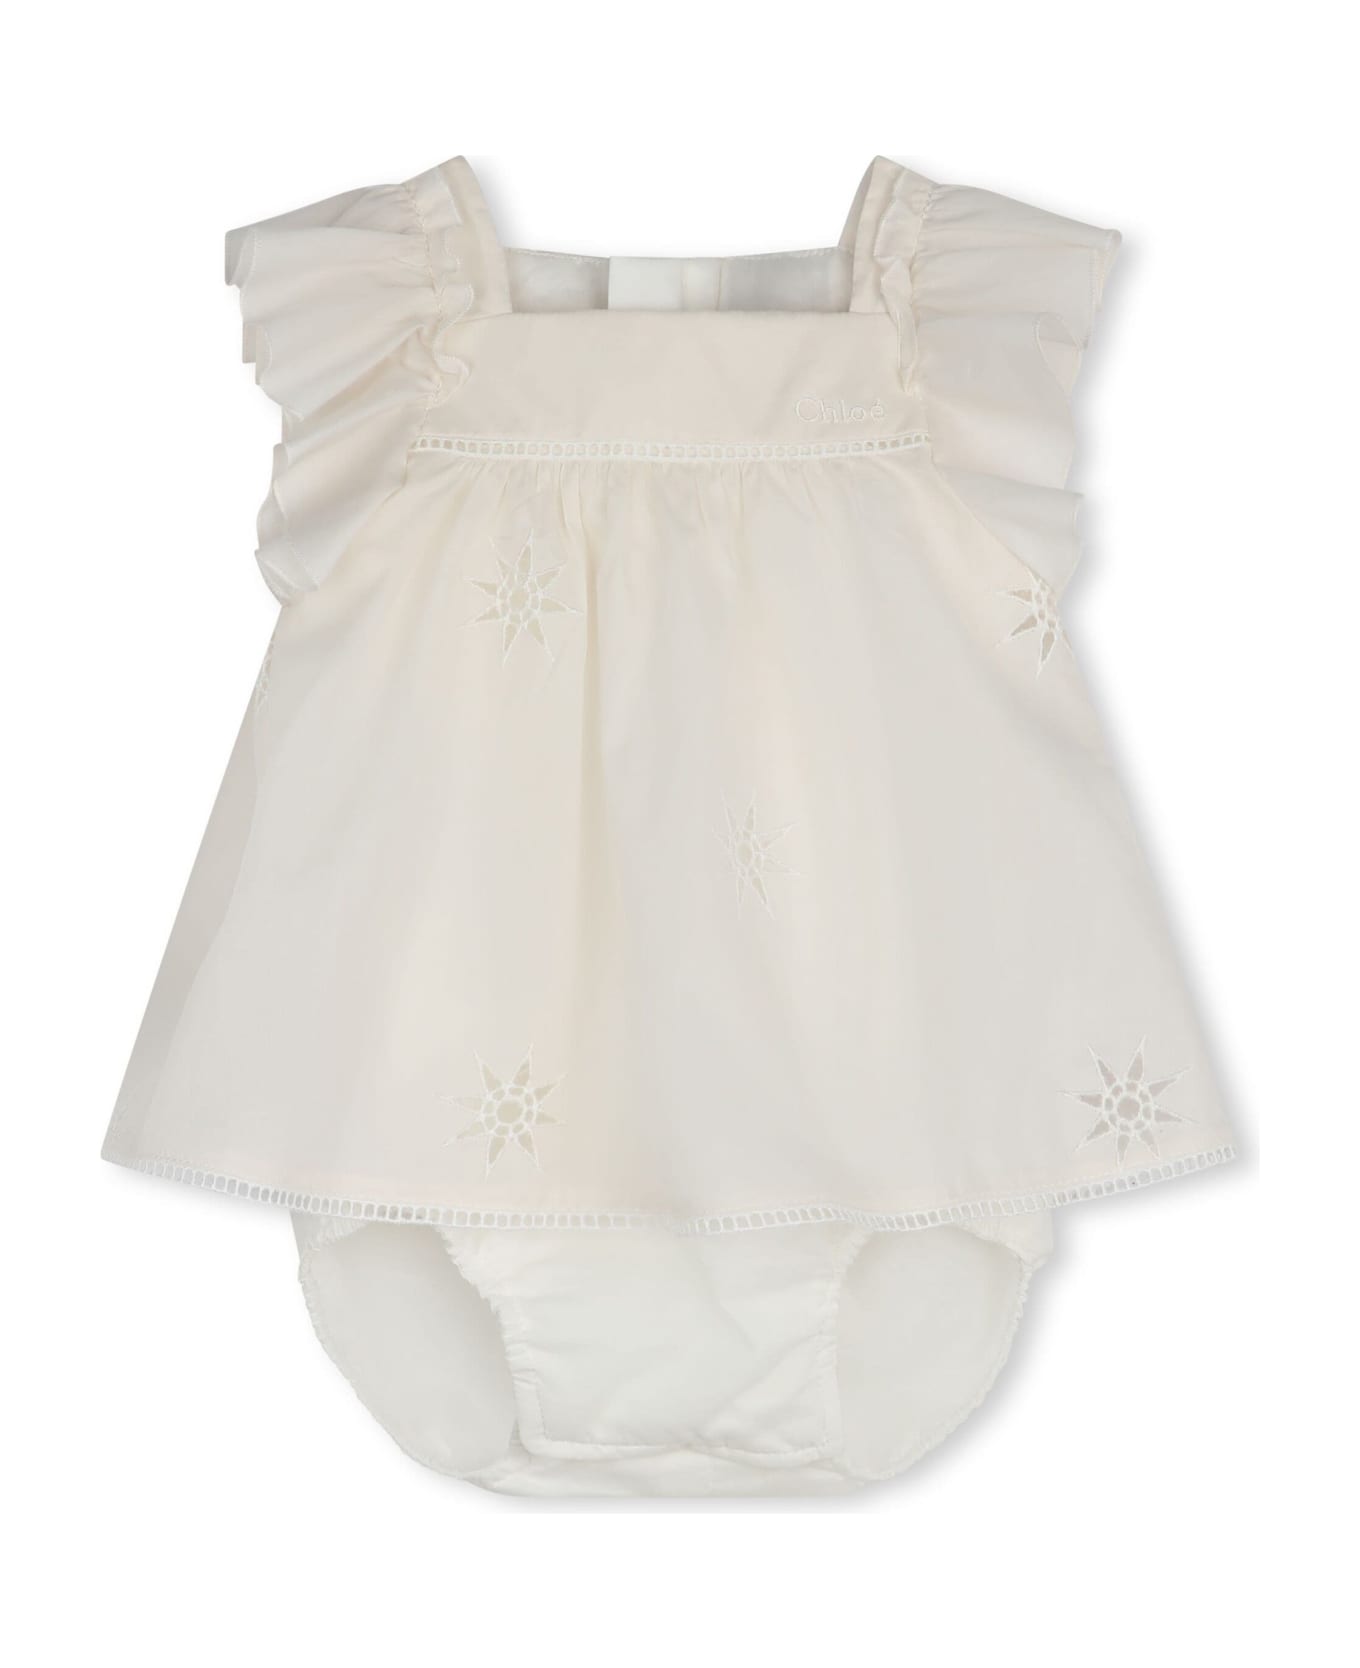 Chloé White Dress With Embroidered Stars And Ladder Stitch Work - White